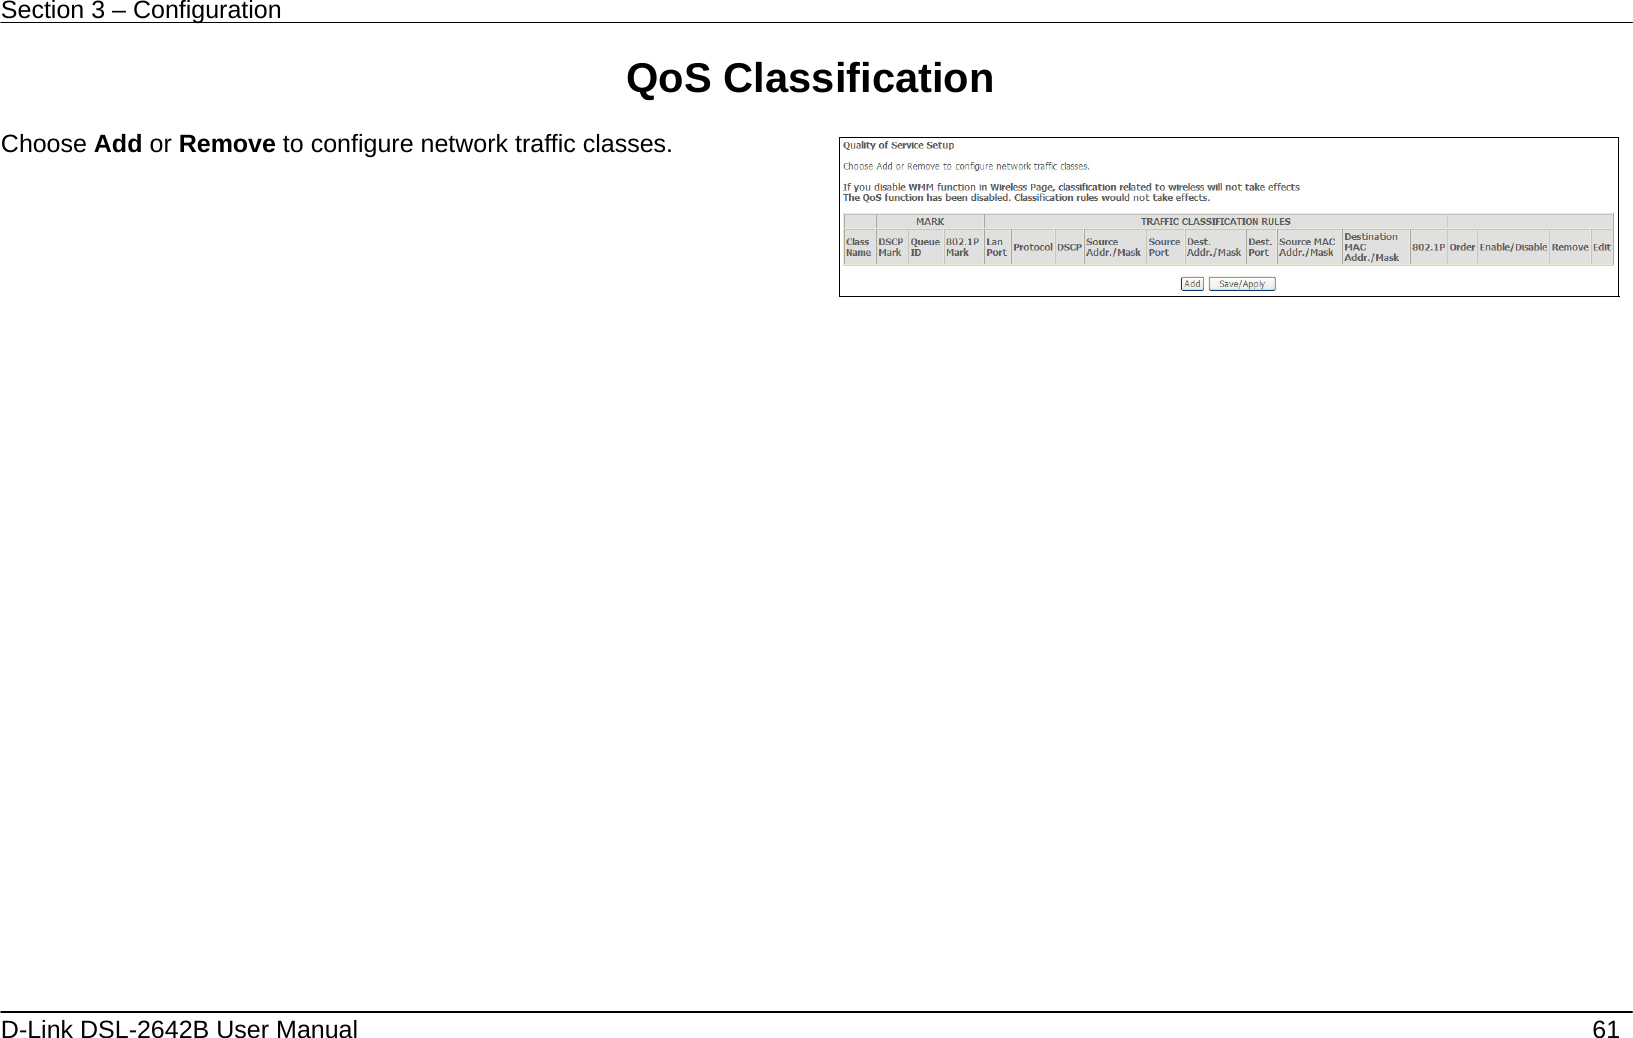 Section 3 – Configuration   D-Link DSL-2642B User Manual    61 QoS Classification  Choose Add or Remove to configure network traffic classes.       